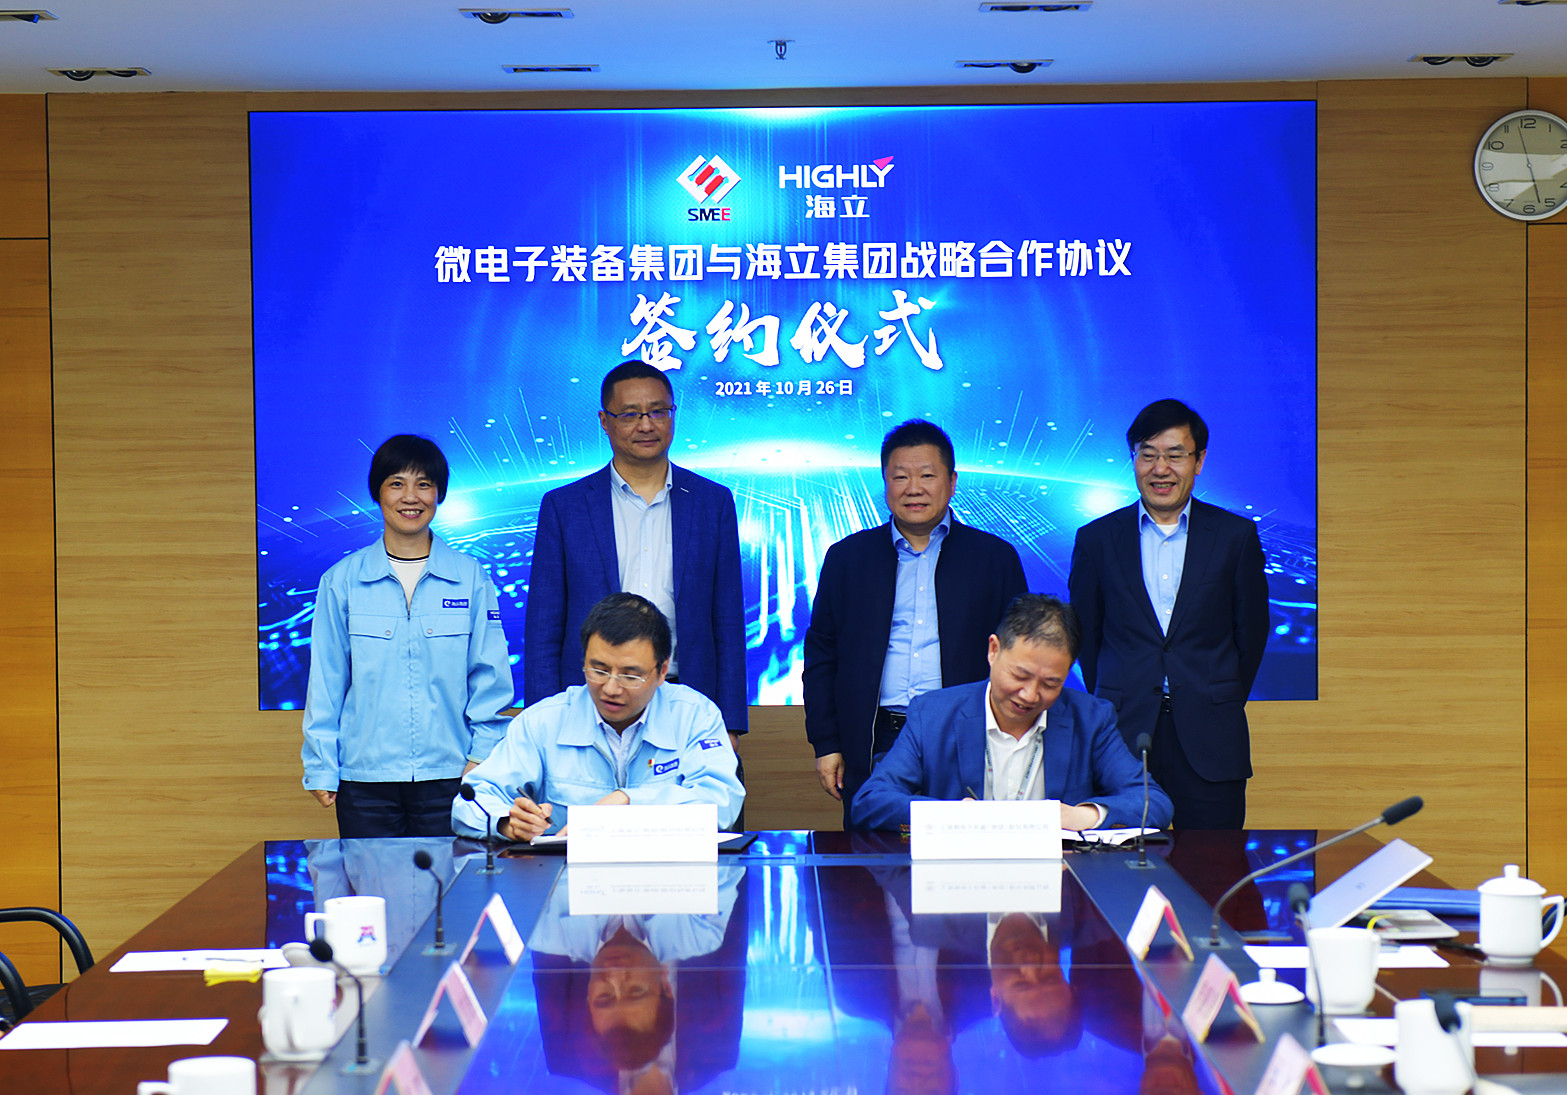 Highly Group and Shanghai Microelectronics Equipment Group signed a strategic cooperation agreement